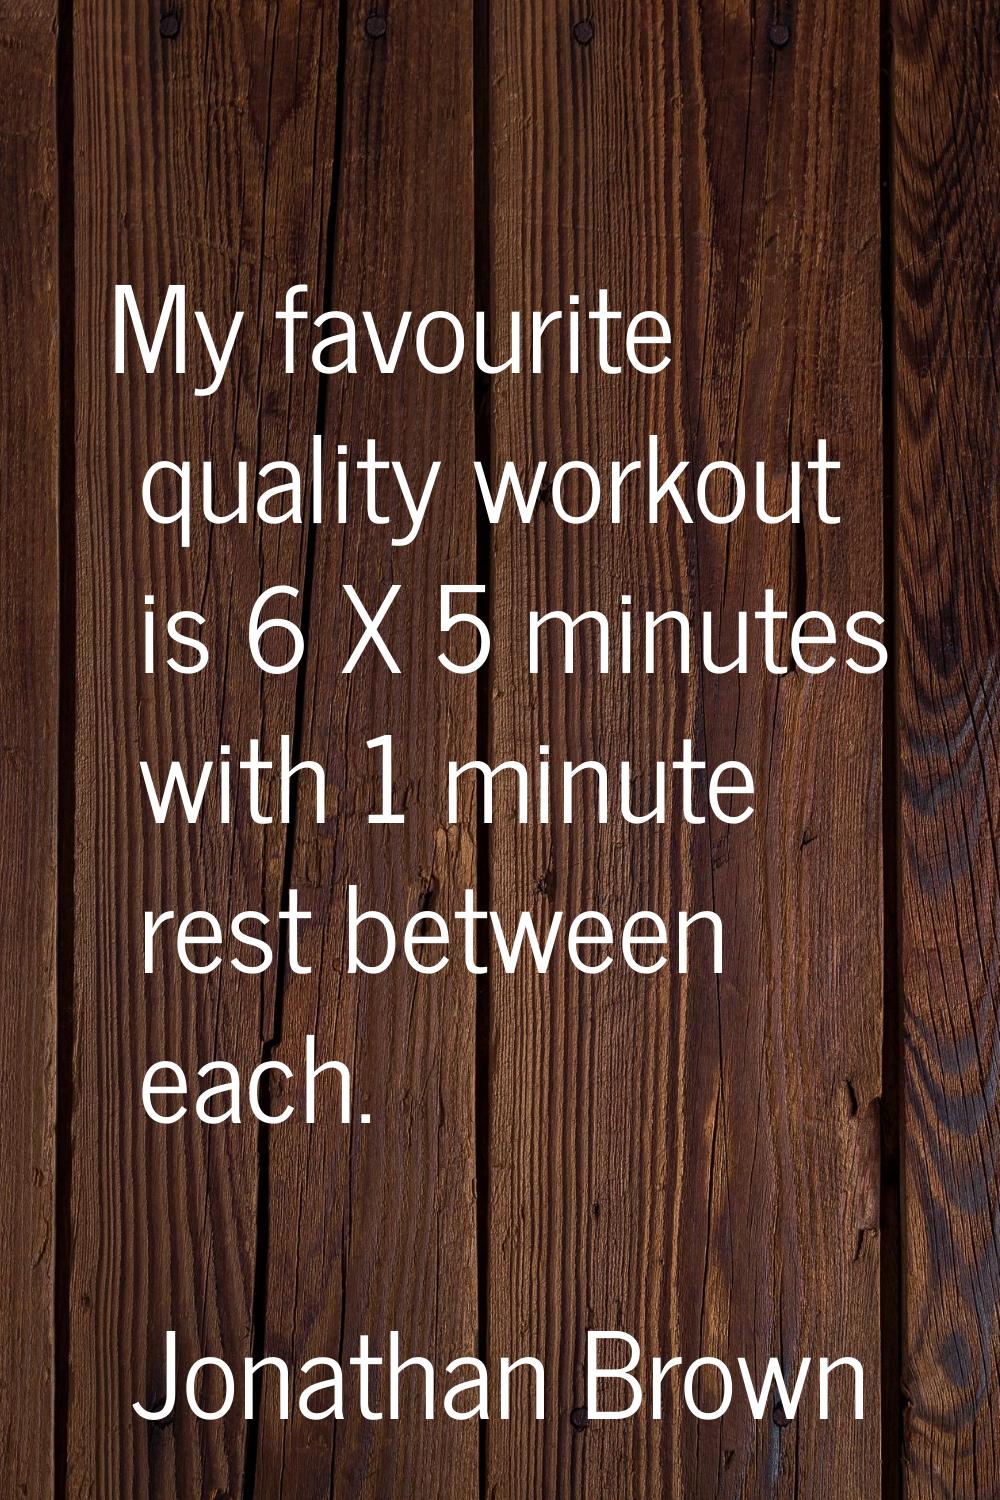 My favourite quality workout is 6 X 5 minutes with 1 minute rest between each.